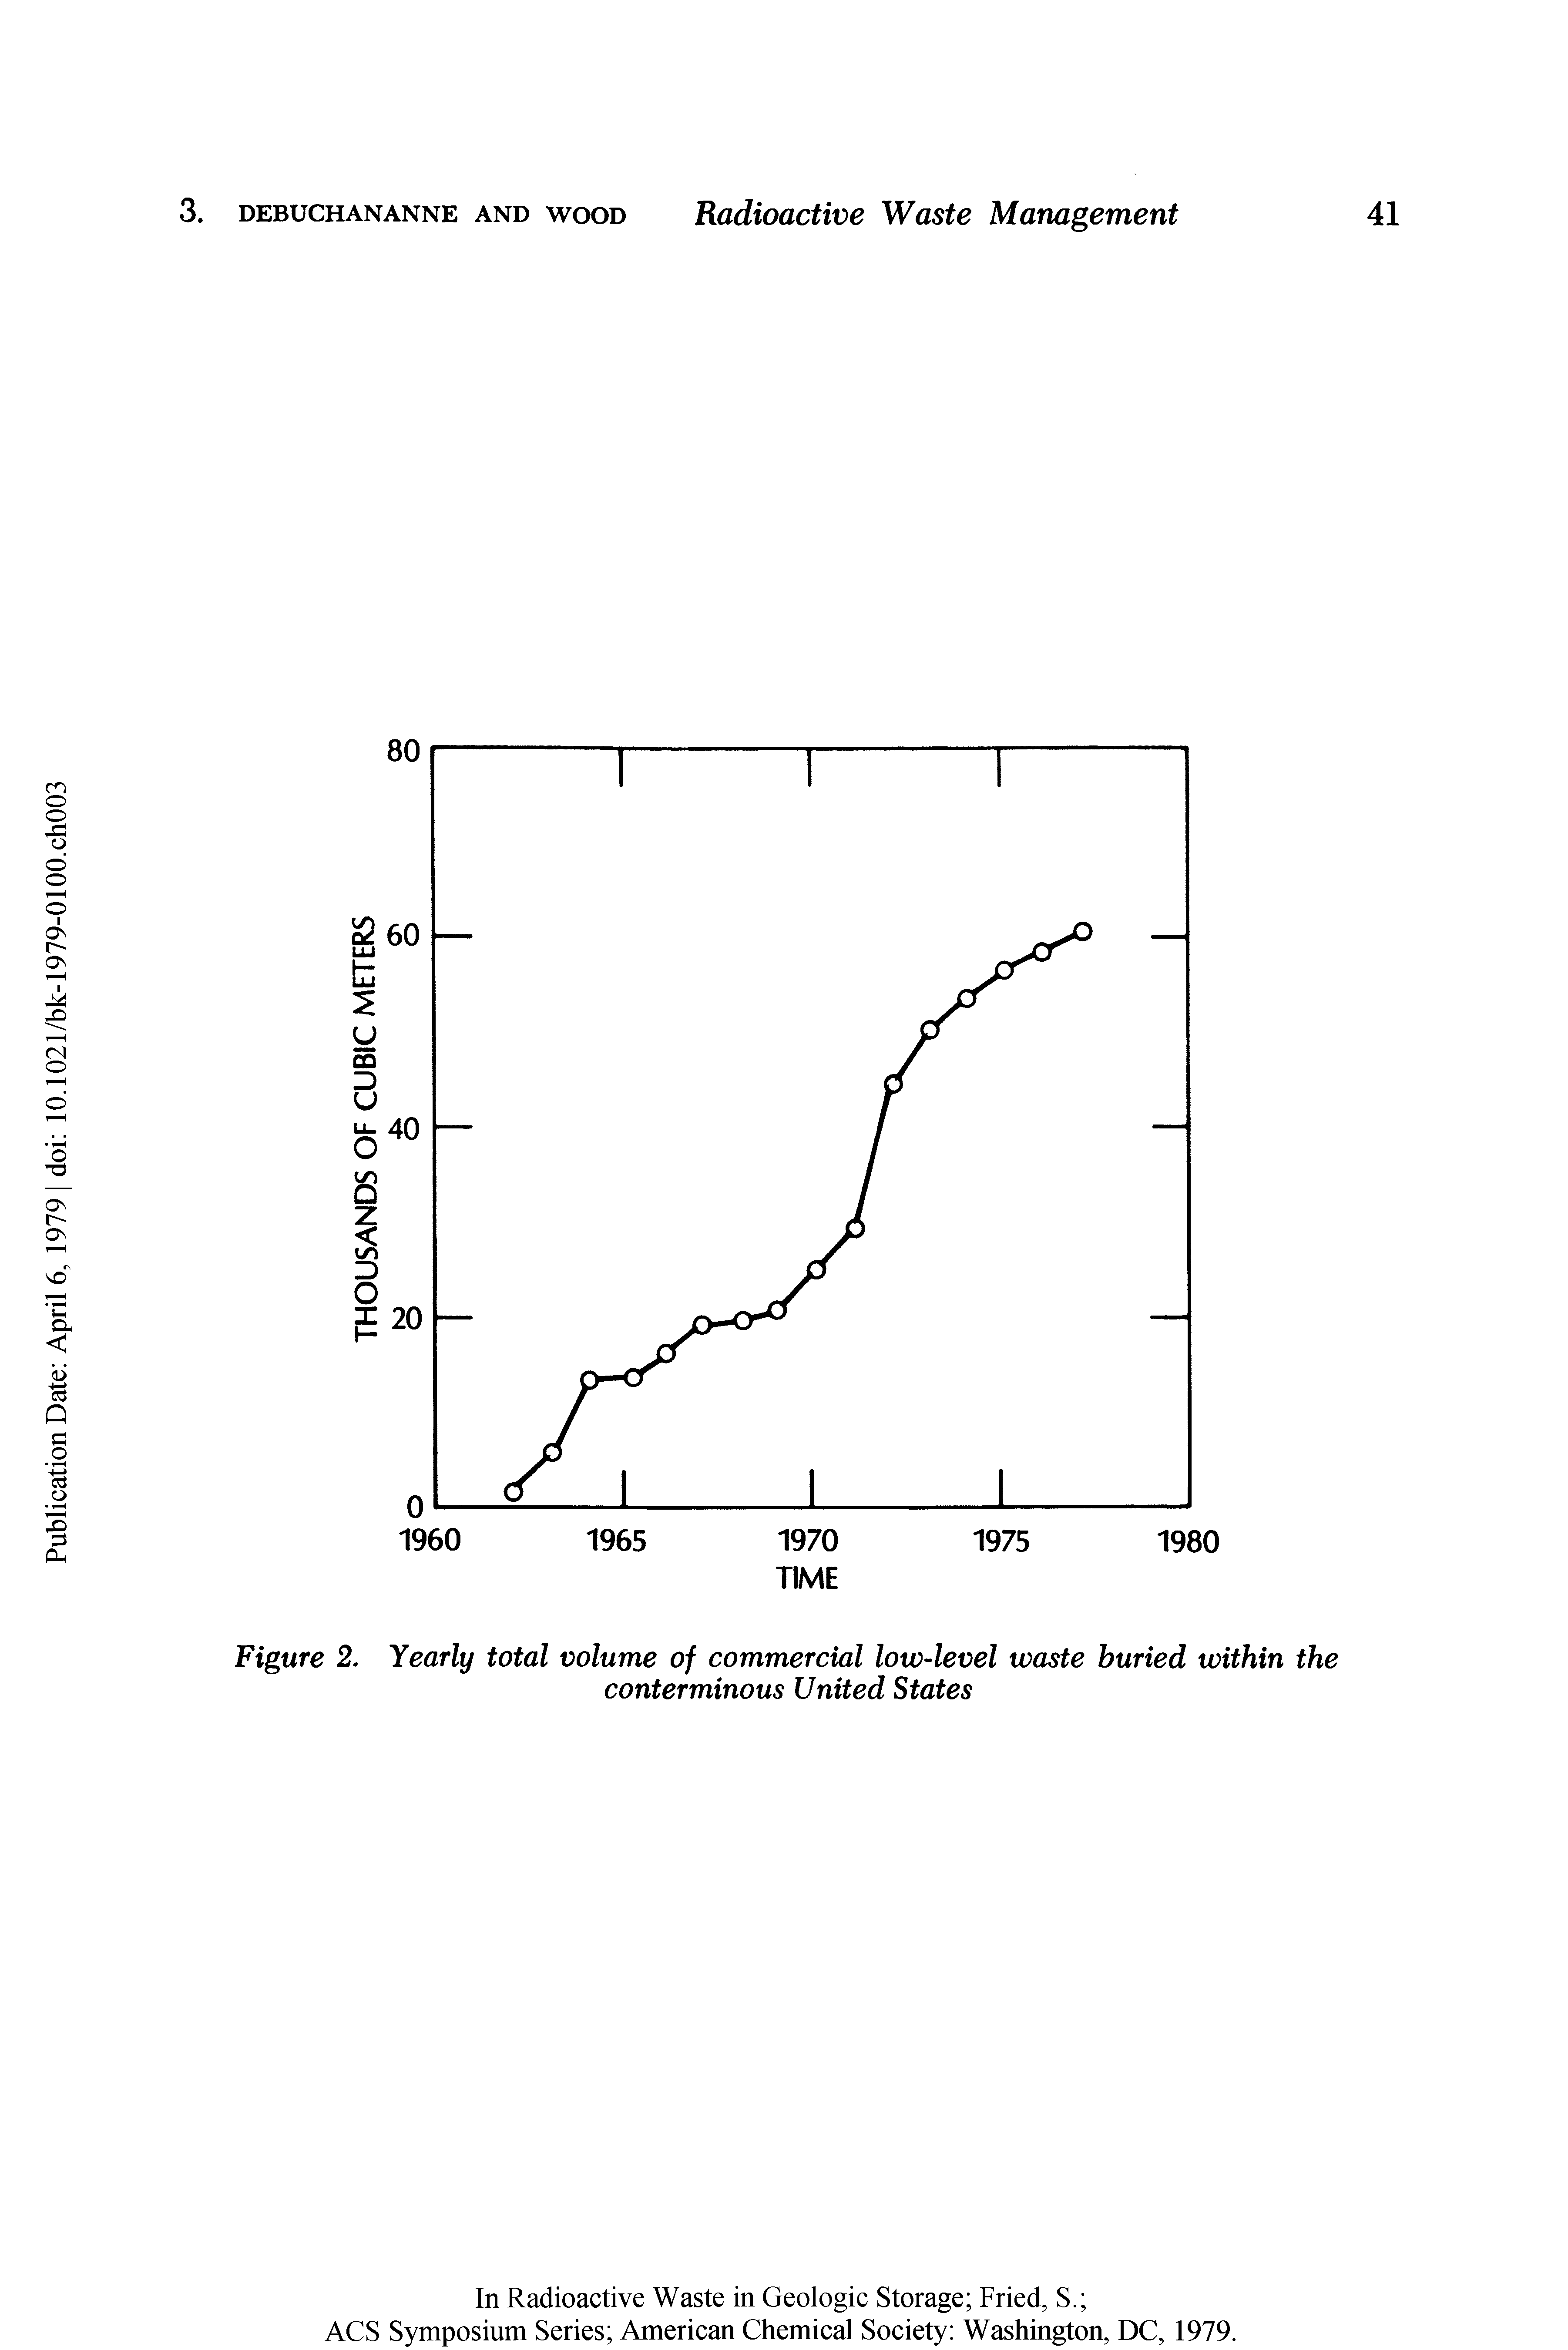 Figure 2. Yearly total volume of commercial low-level waste buried within the conterminous United States...